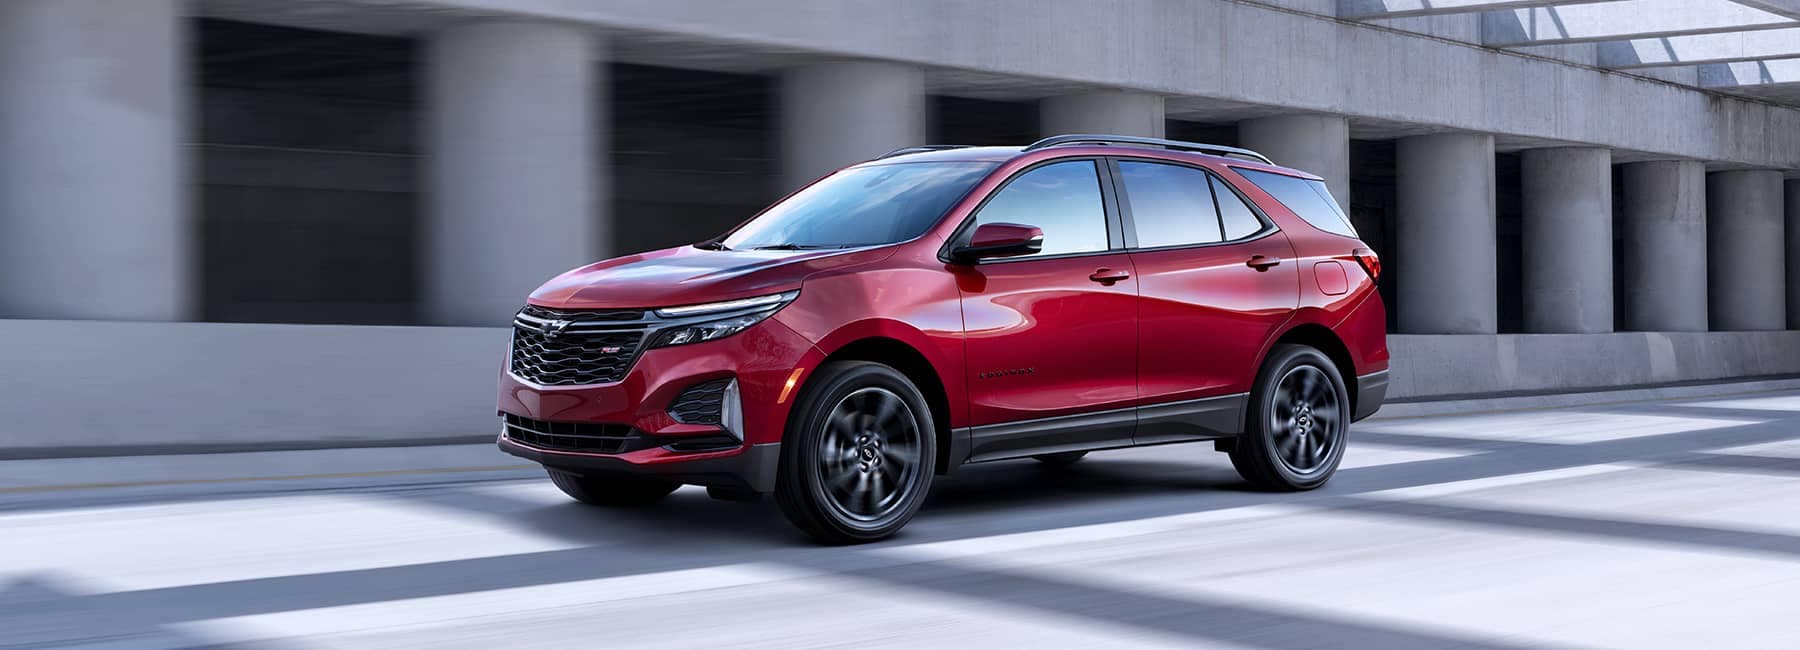 image of a red Chevy Equinox